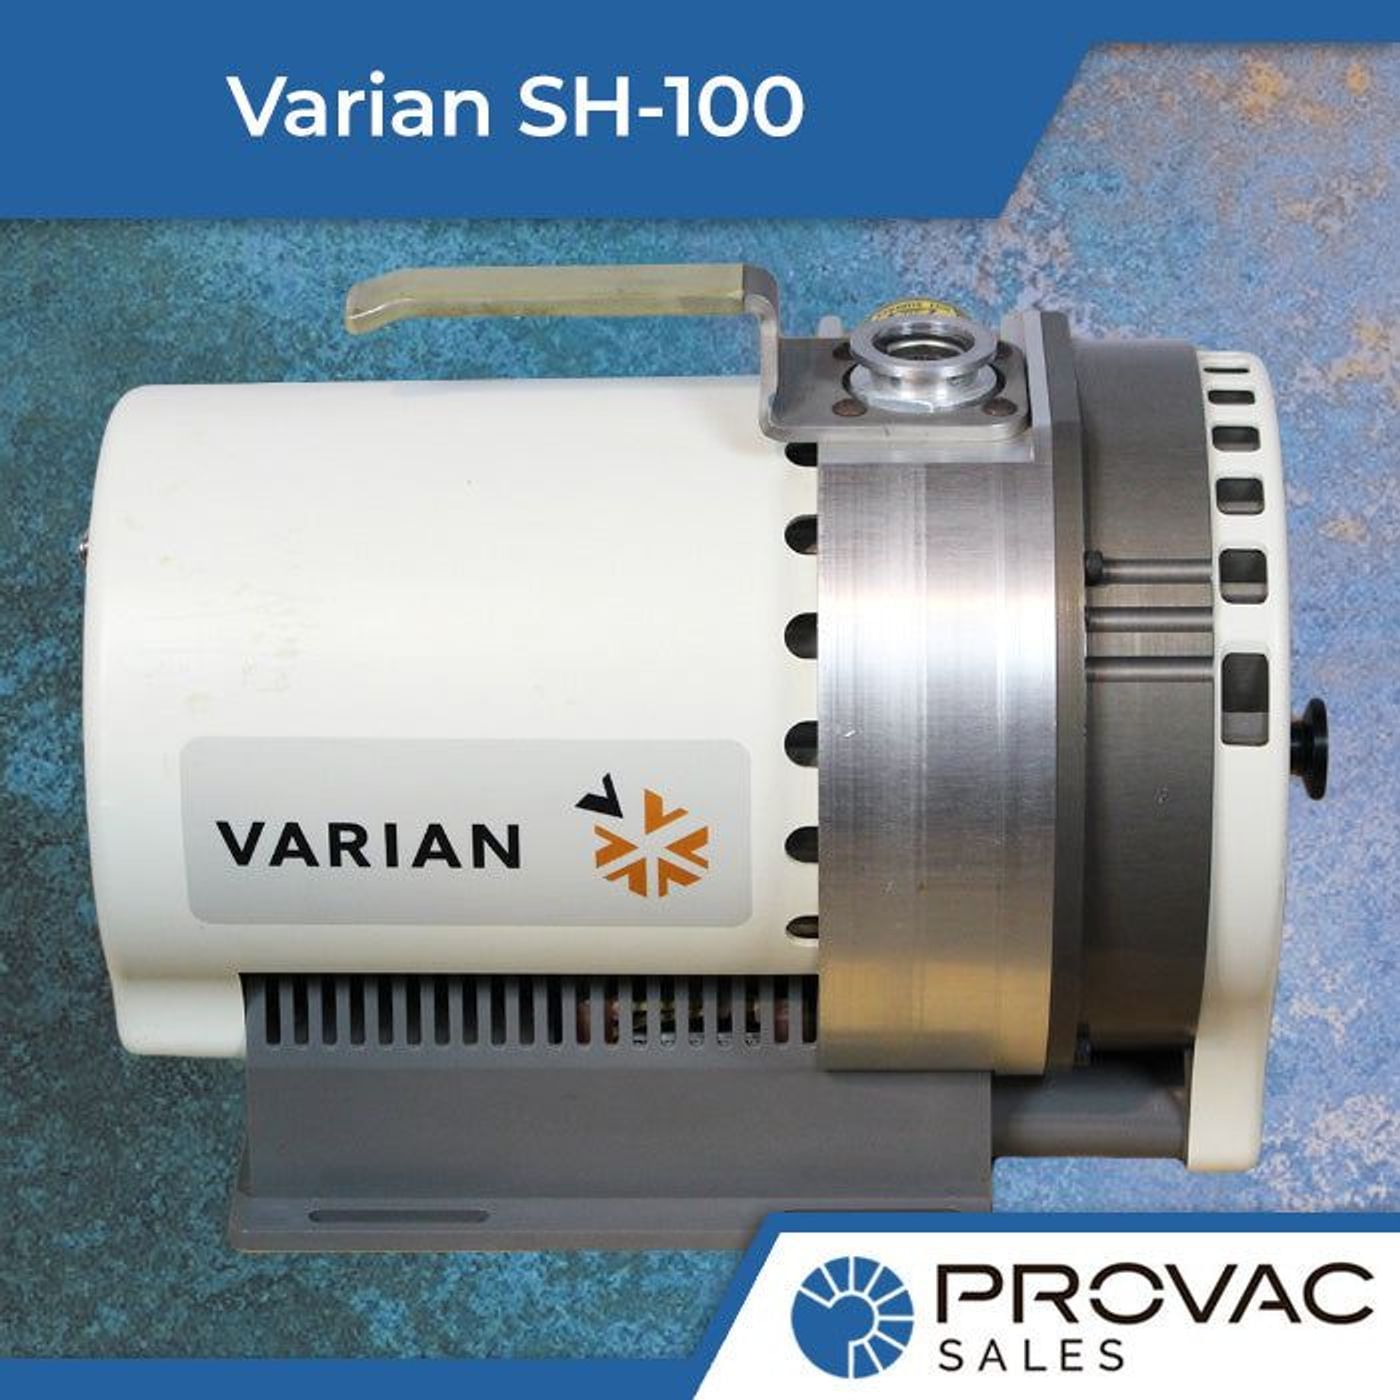 Varian SH-100 Scroll Pump: In Stock, Ready To Ship